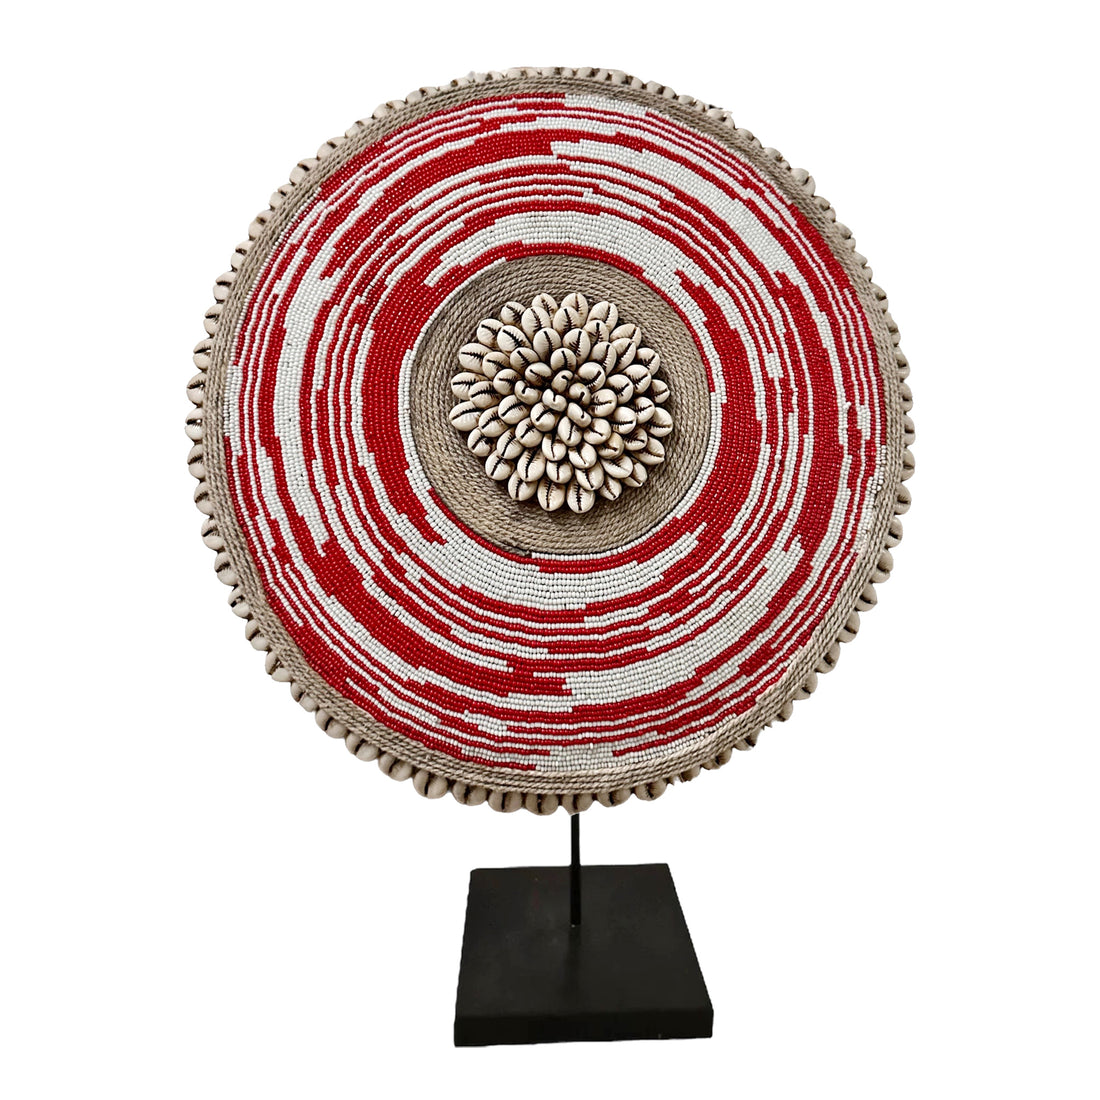 African Beaded Shield - Red/White Mesh